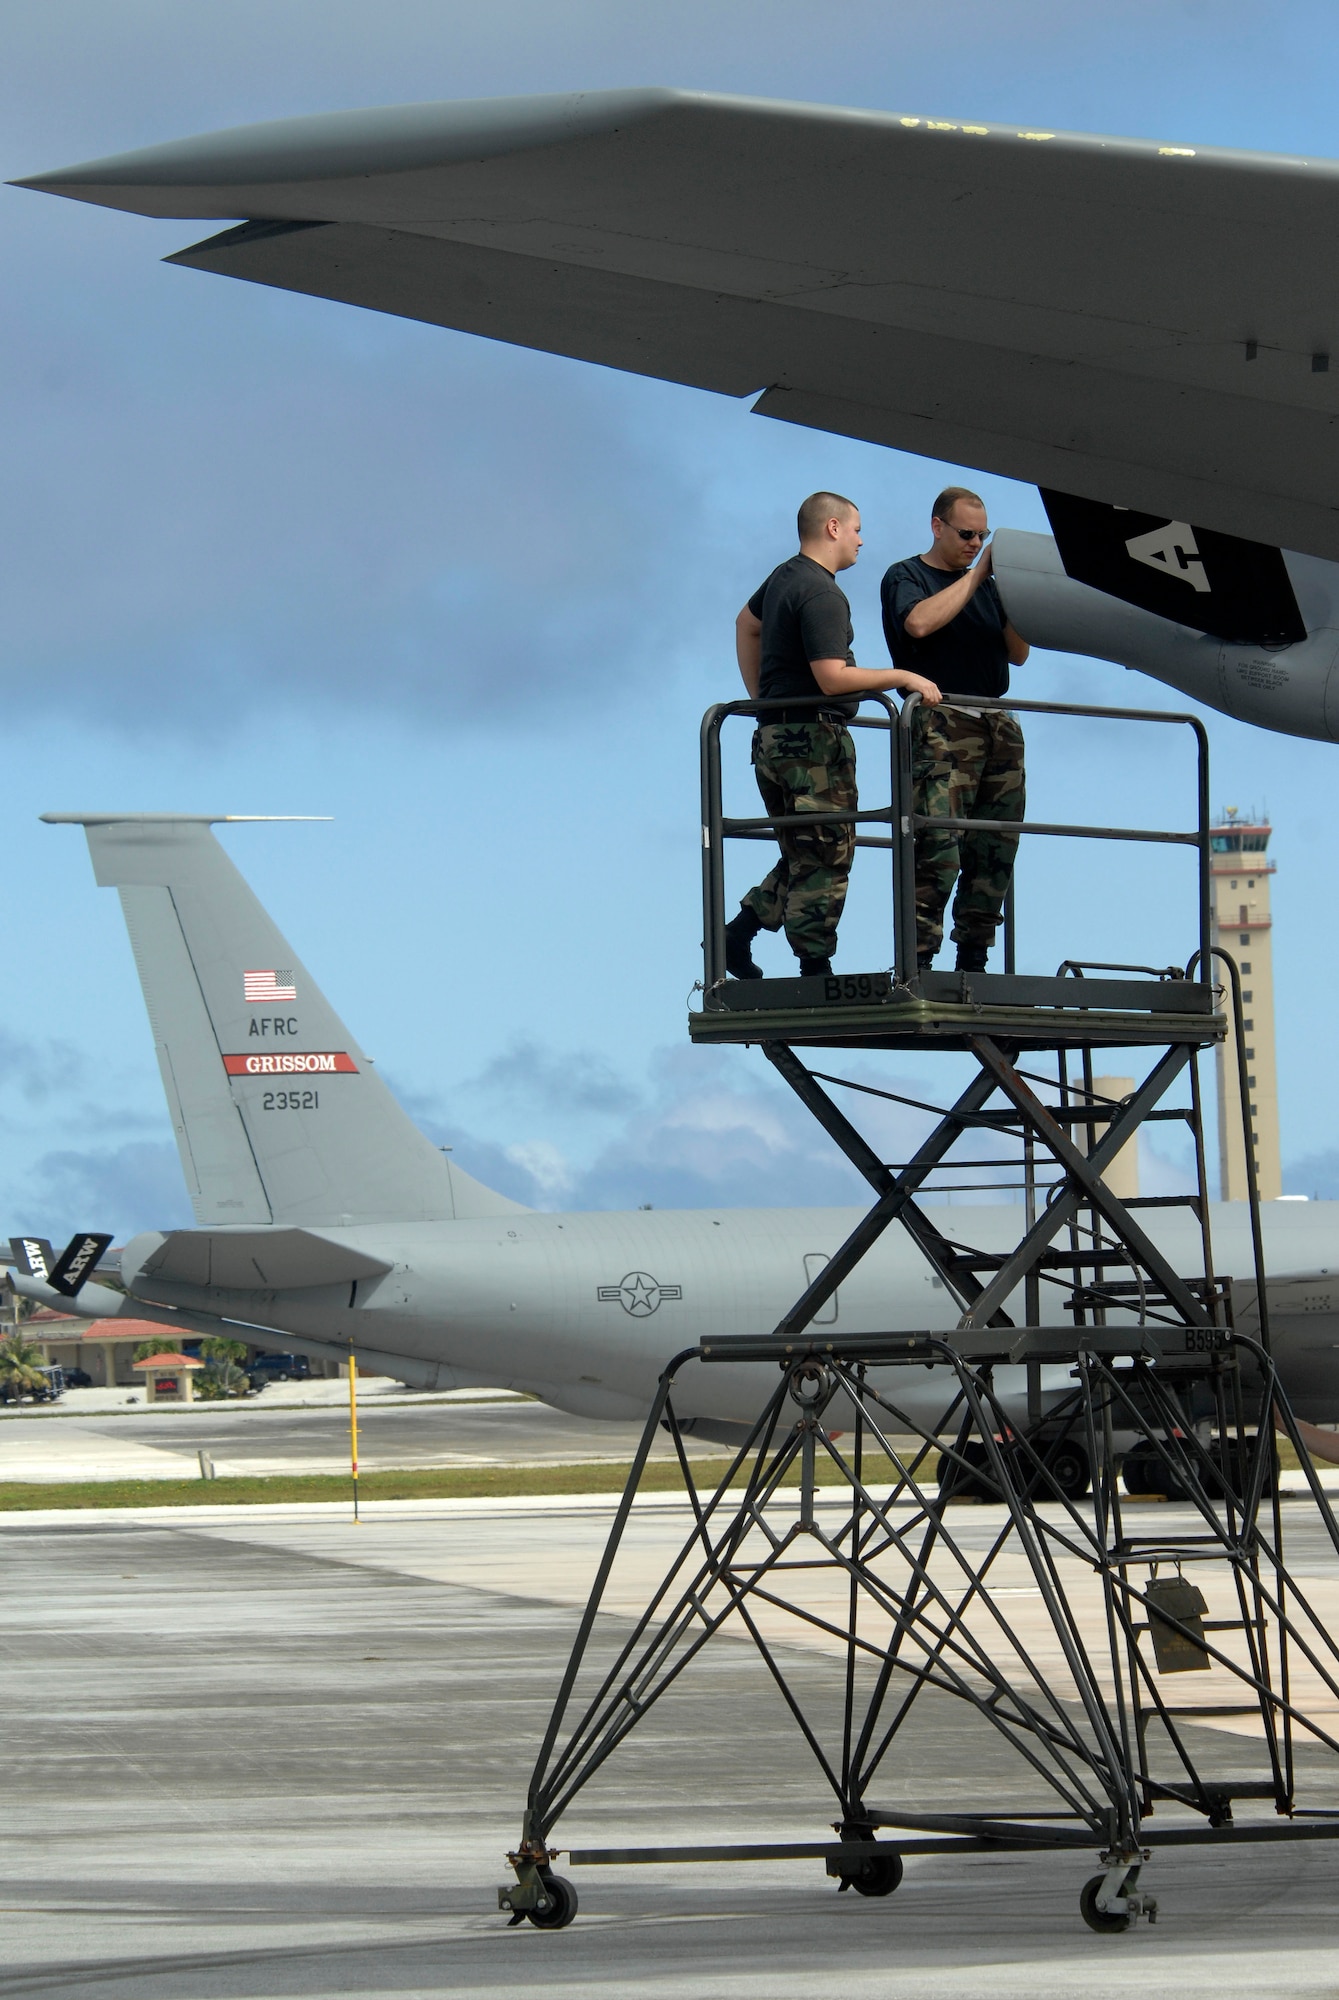 (left) Senior Airman David Engelhardt, crew chief and Master Sgt. Brian Dickerson an electrician, change a KC-135R Stratotanker boom marker light Dec. 31 at Andersen Air Force Base, Guam. Both are assigned to the 434th Air Refueling Wing at Grissom Air Reserve Base, Ind., and are deployed to Andersen AFB in support of Pacific theater refueling operations.  
 
(U.S. Air Force photo/ Master Sgt. Kevin J. Gruenwald) released




















  












 











































  












 

























